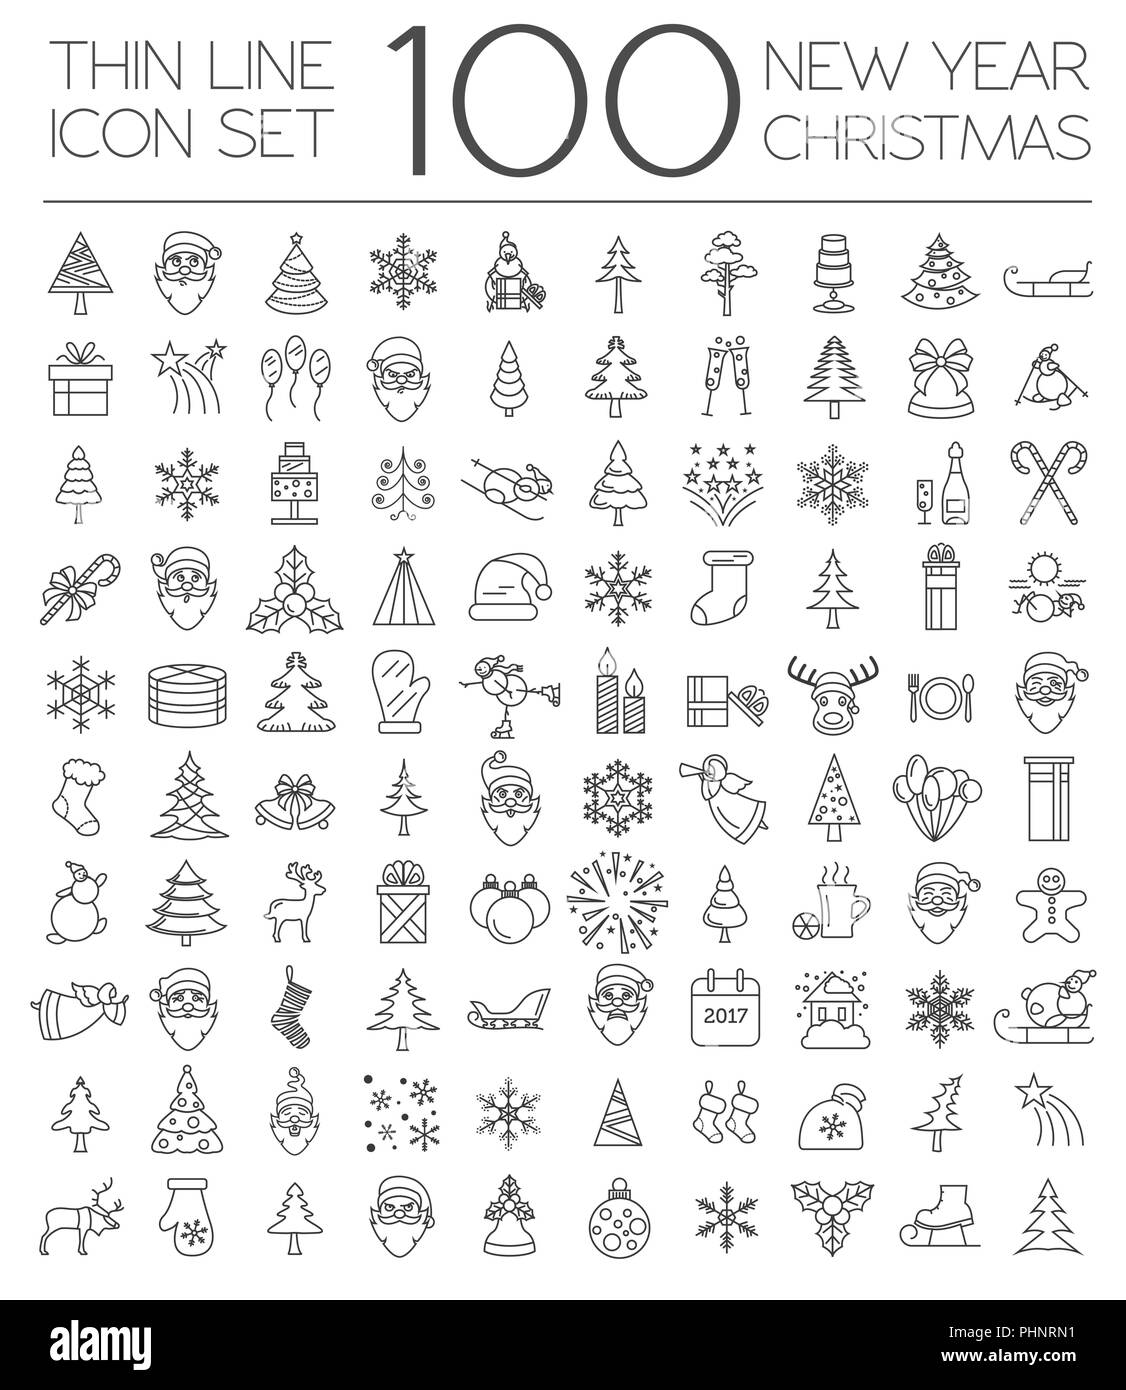 Christmas, New Year holidays icon big set. Thin line version. Flat style collection. Vector illustration Stock Vector